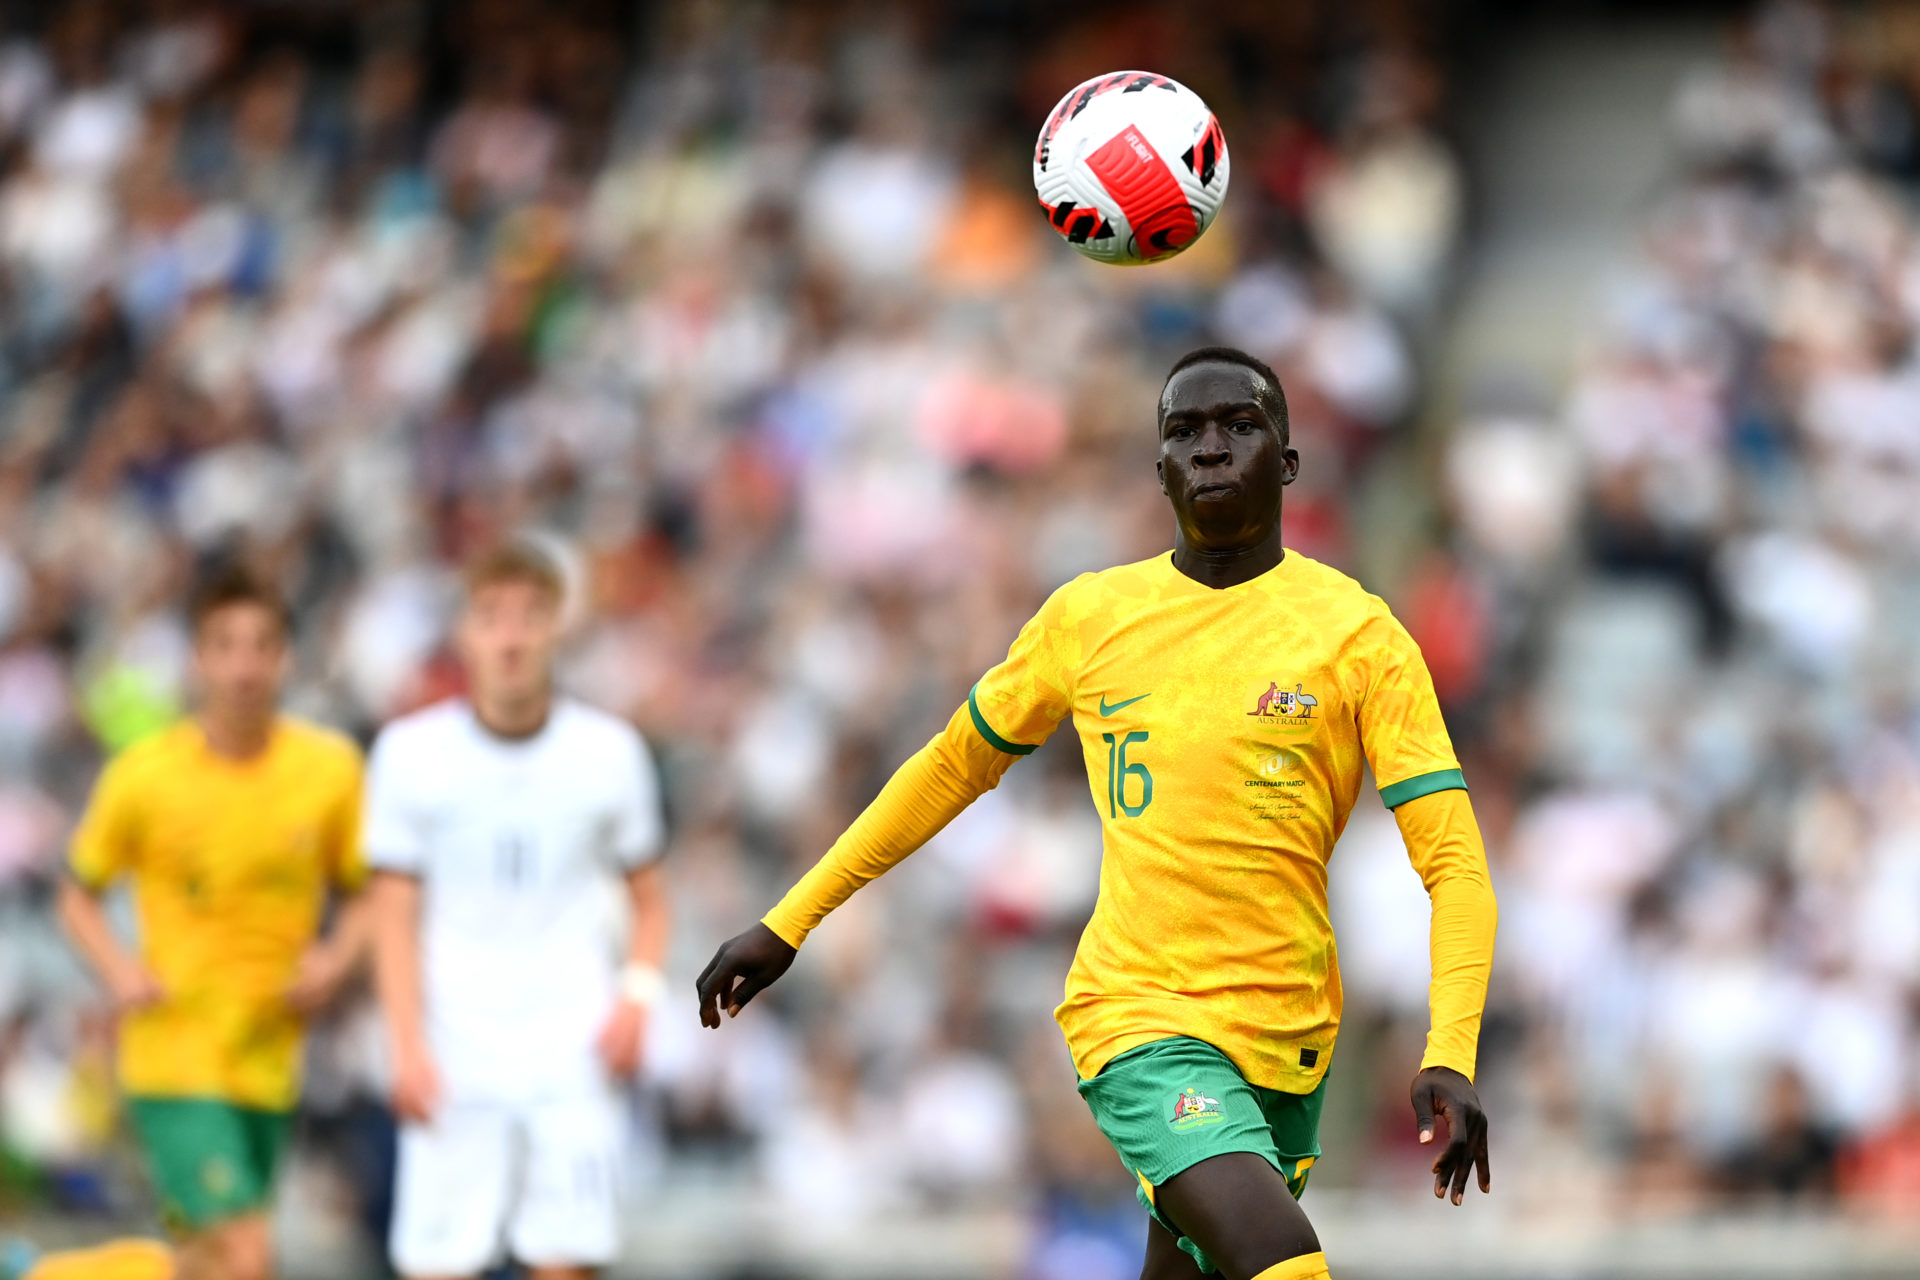 Kuol has agreed Newcastle terms